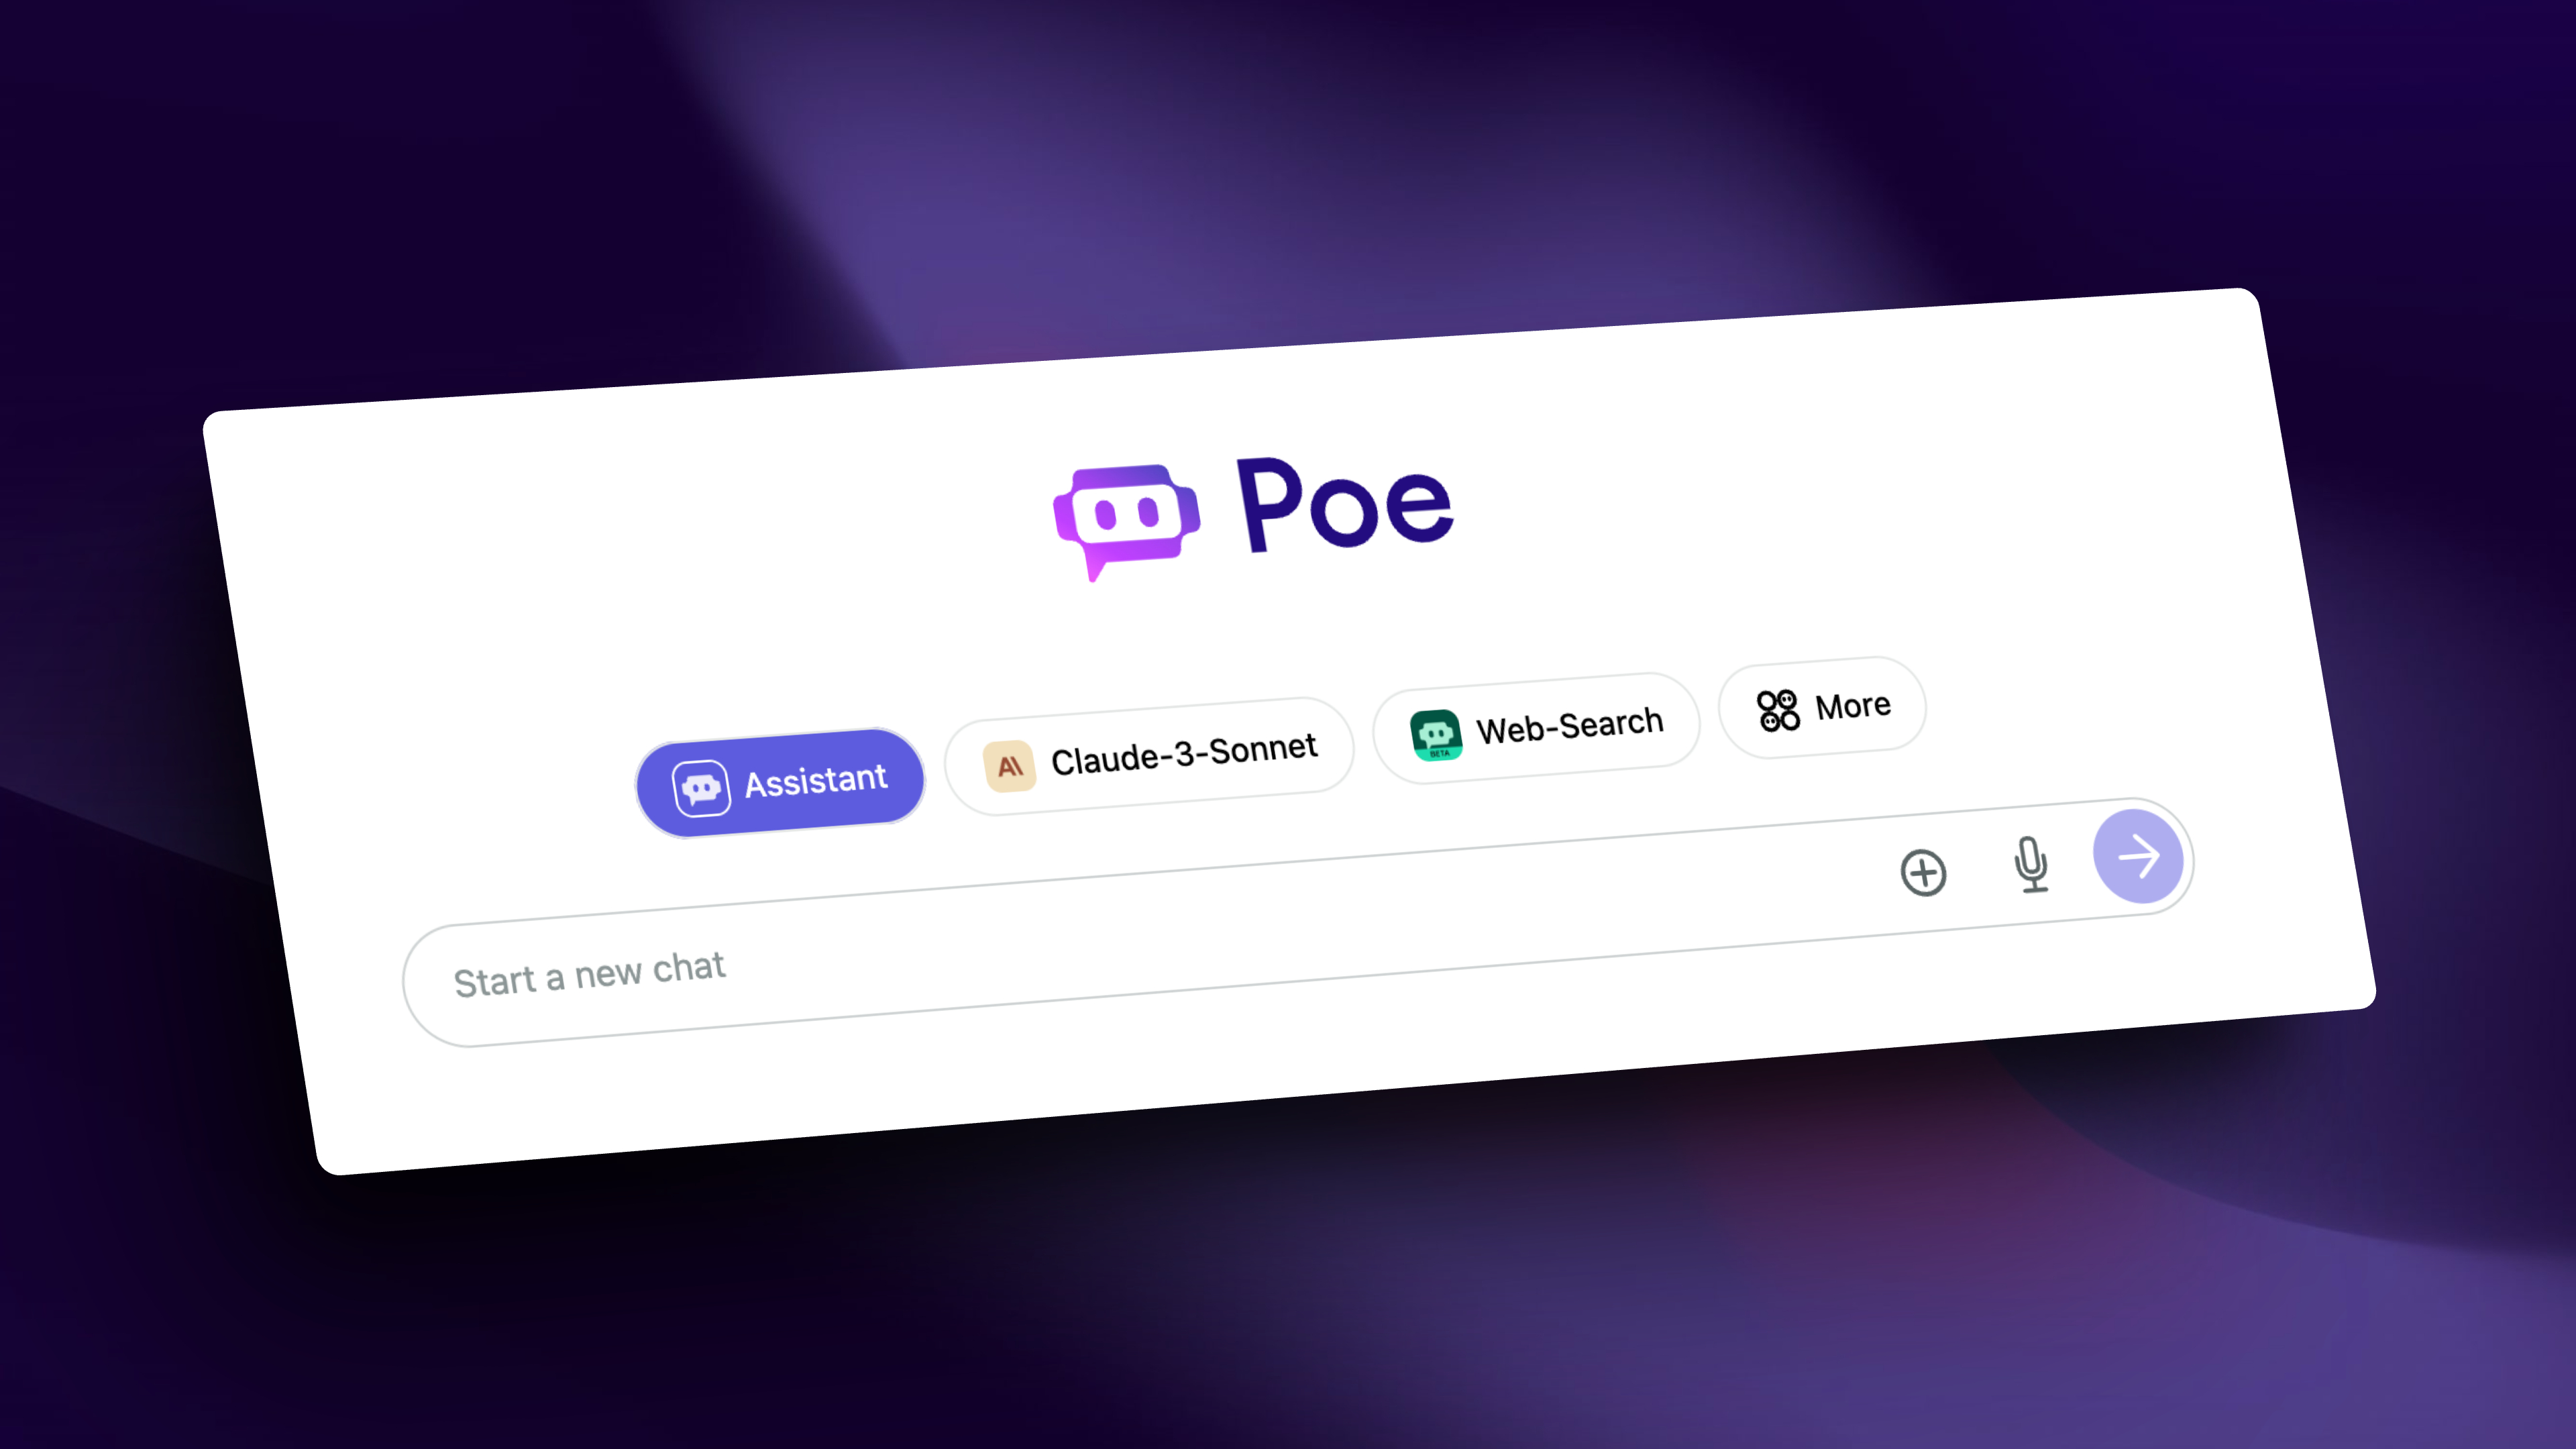 Poe chat app interface showing conversation with user 'Poe